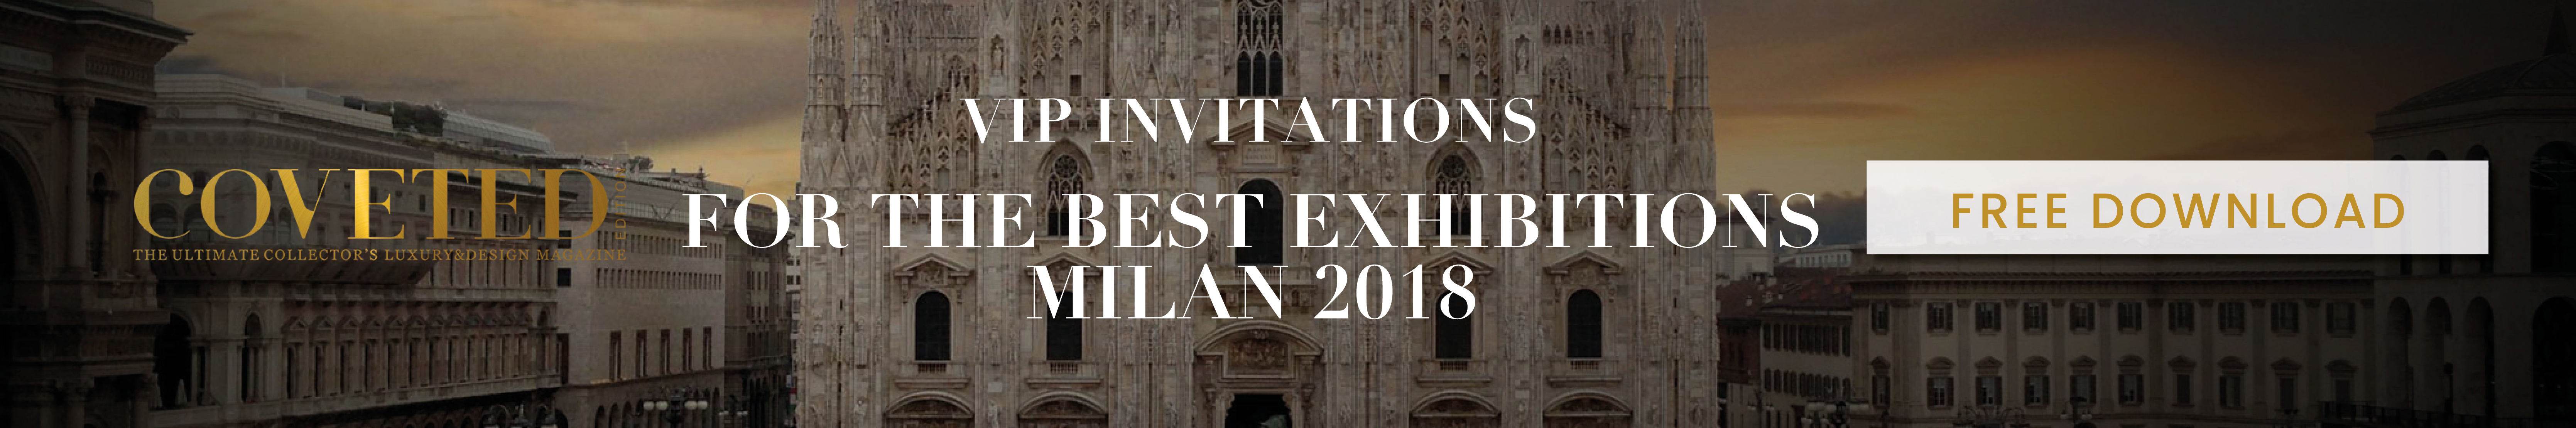 Isaloni 2018 – Find Out What Happened During Milan Design Week At Salone Del Mobile